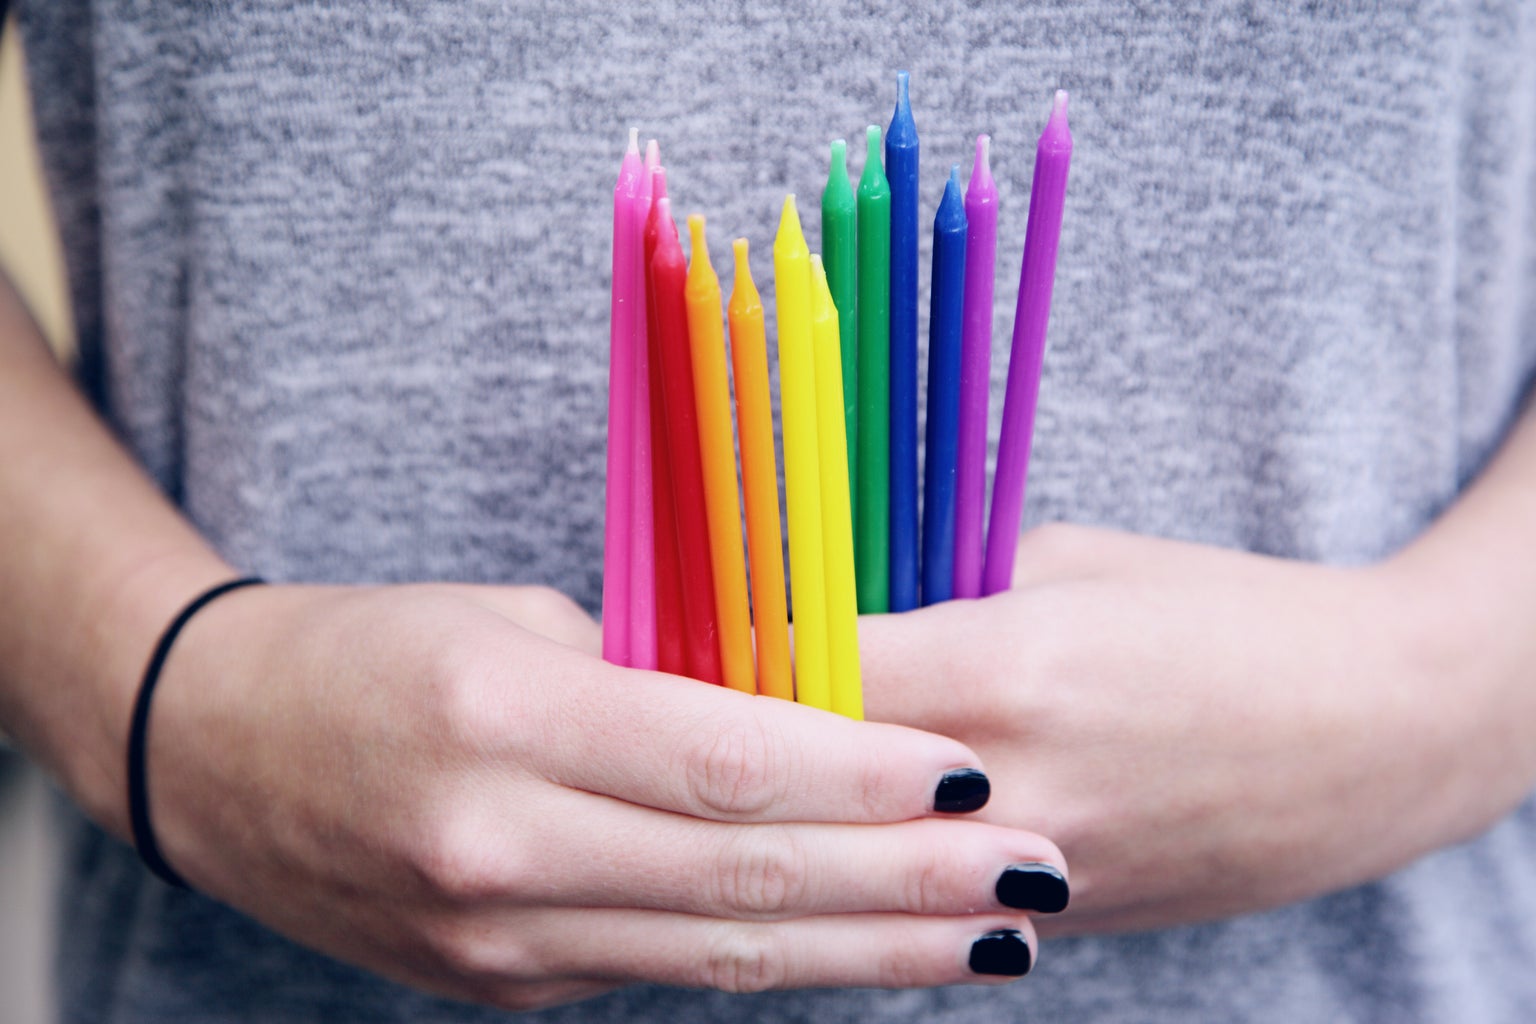 A person holding a collection of colorful birthday candles